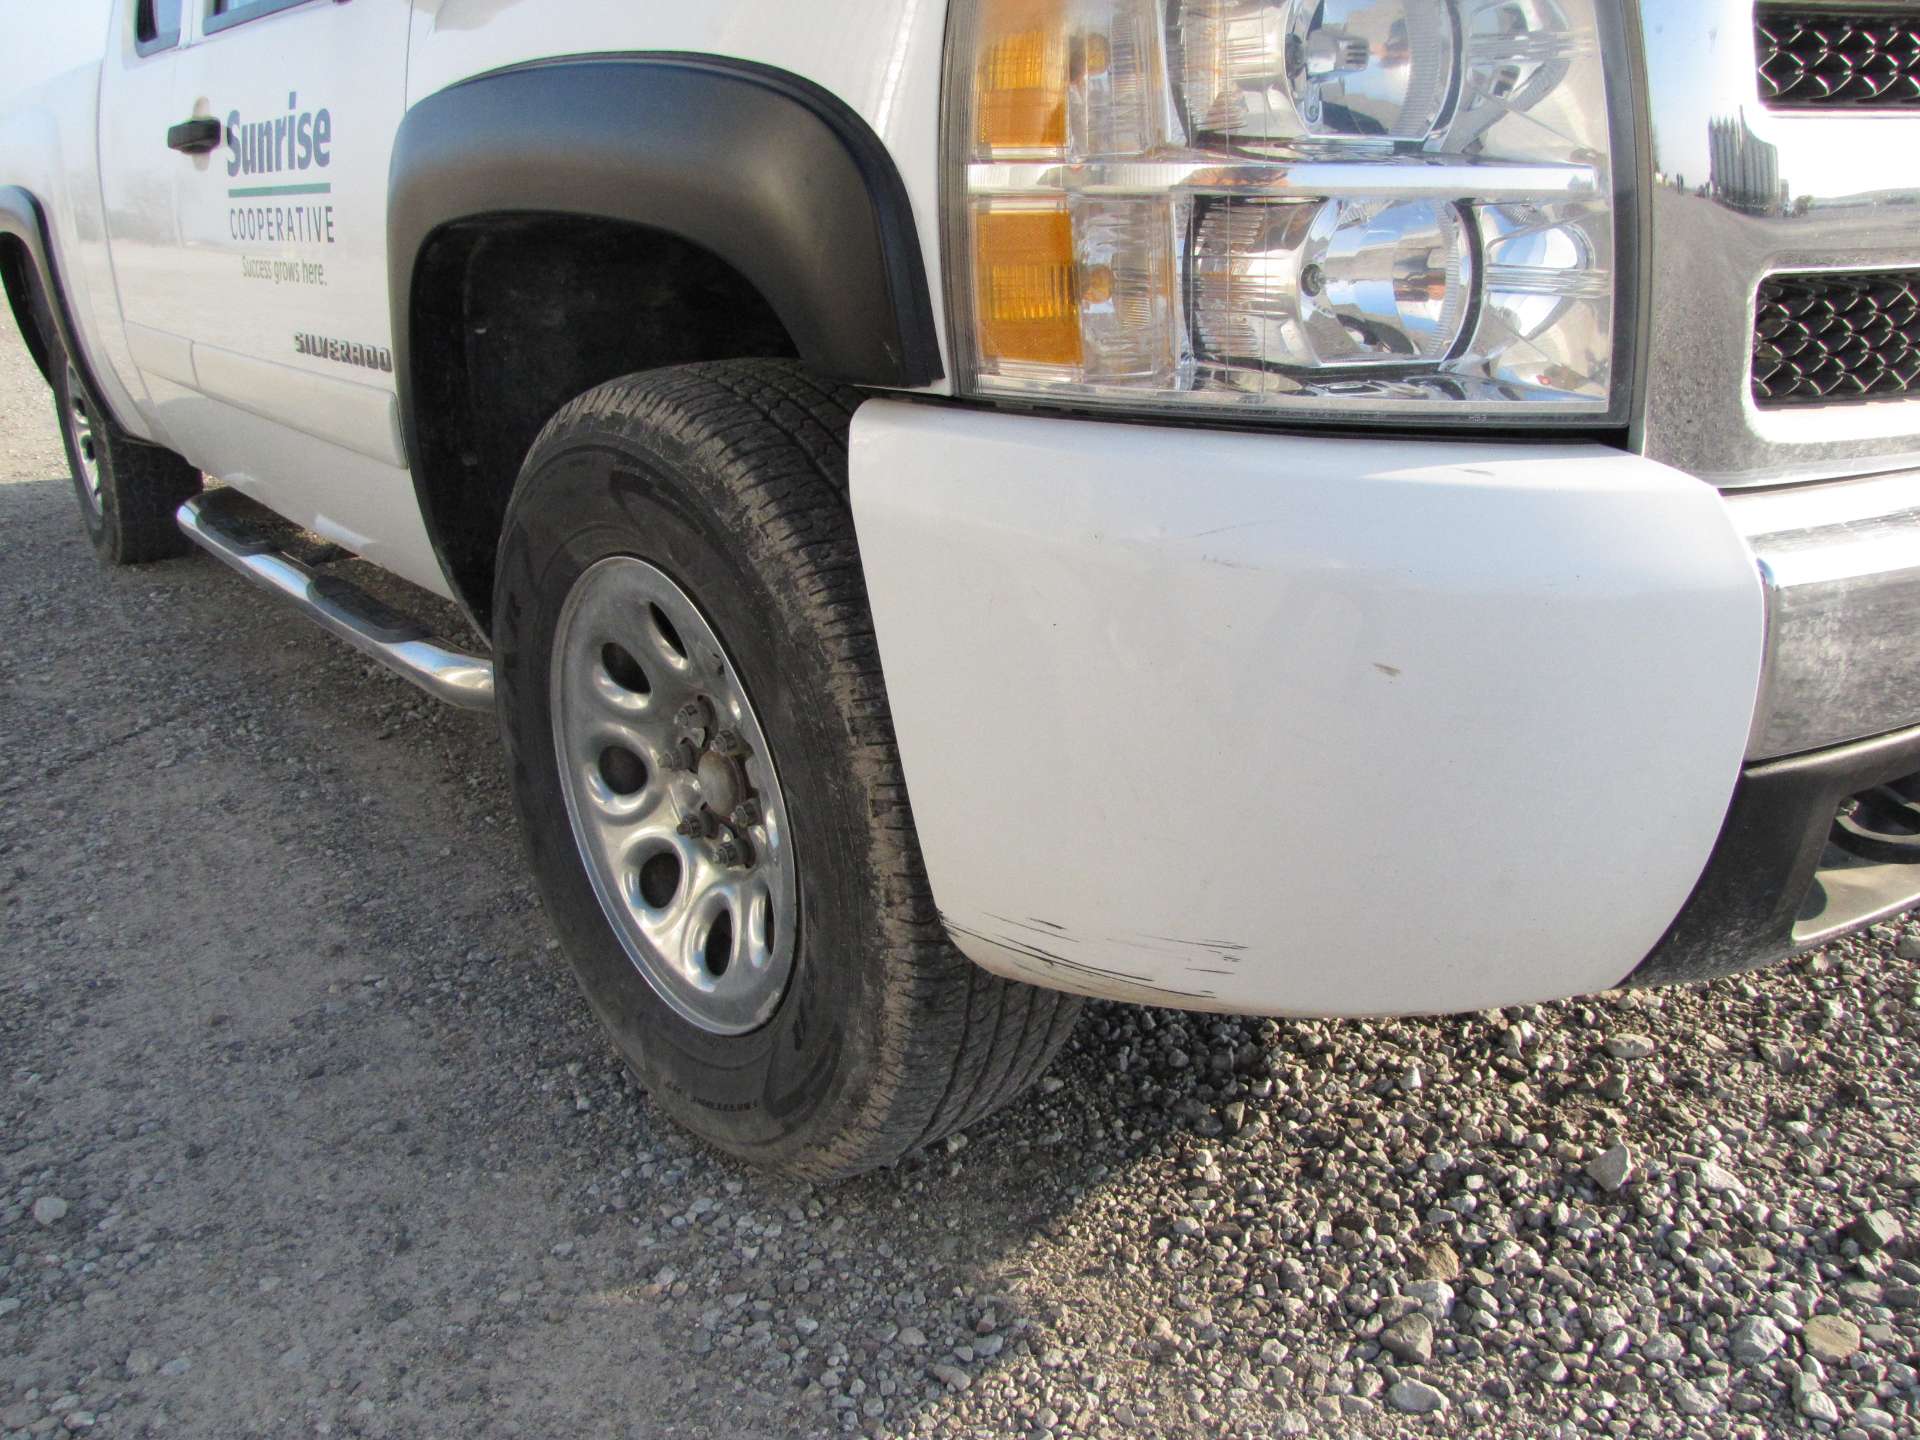 2008 Chevy Silverado 1500 LT Pickup Truck (CRACKED FRAME) - Image 34 of 43